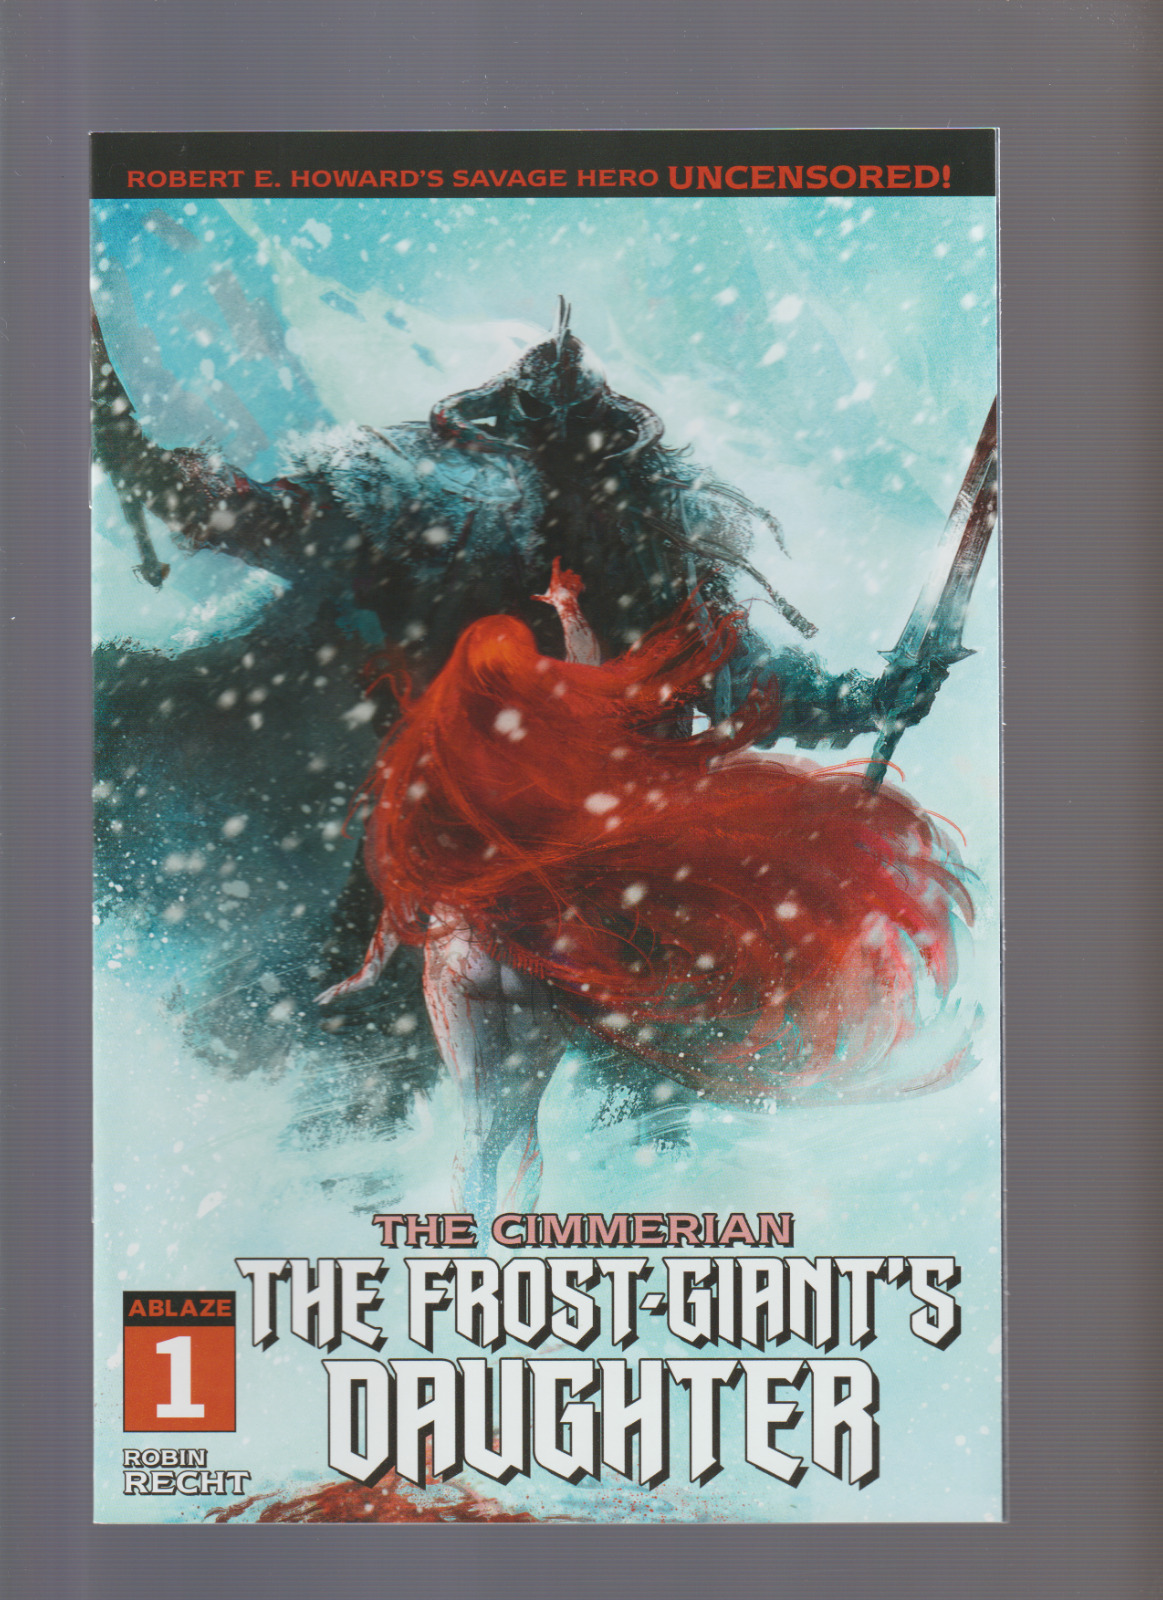 The Cimmerian: THE FROST-GIANT'S DAUGHTER #1 (2020) Robin Recht VARIANT COVER